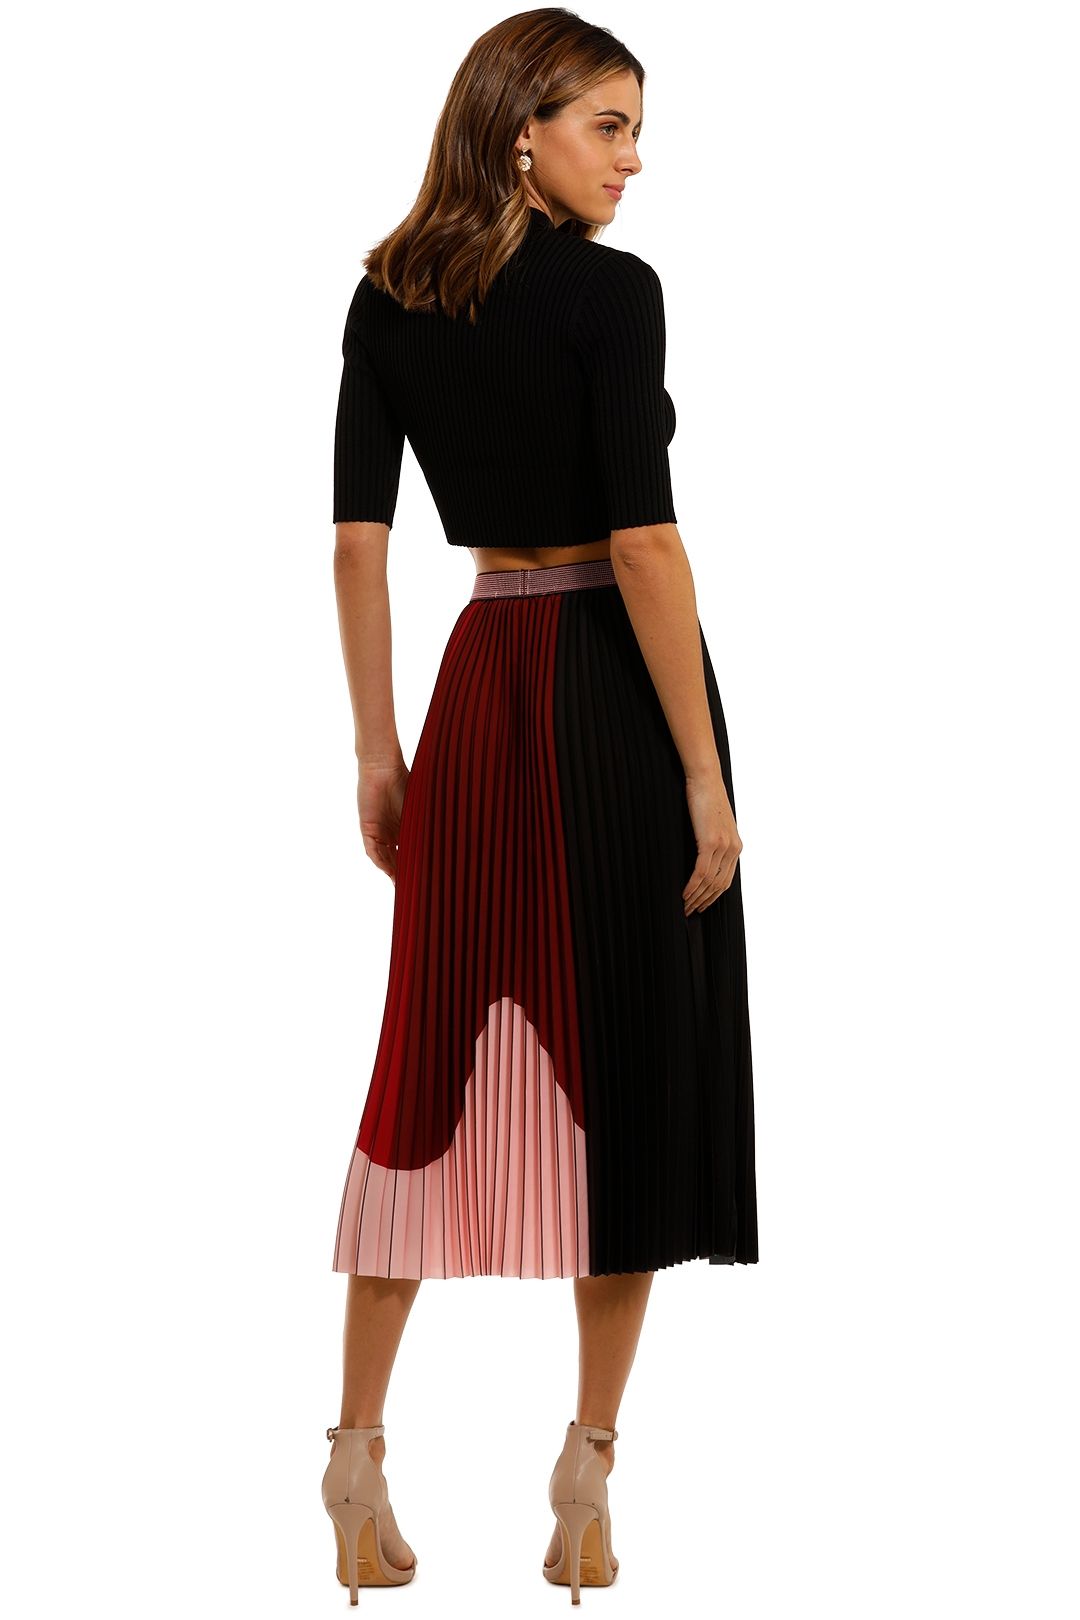 Coop by Trelise Cooper Pleat Emotion Skirt Wine Mix Colour Block